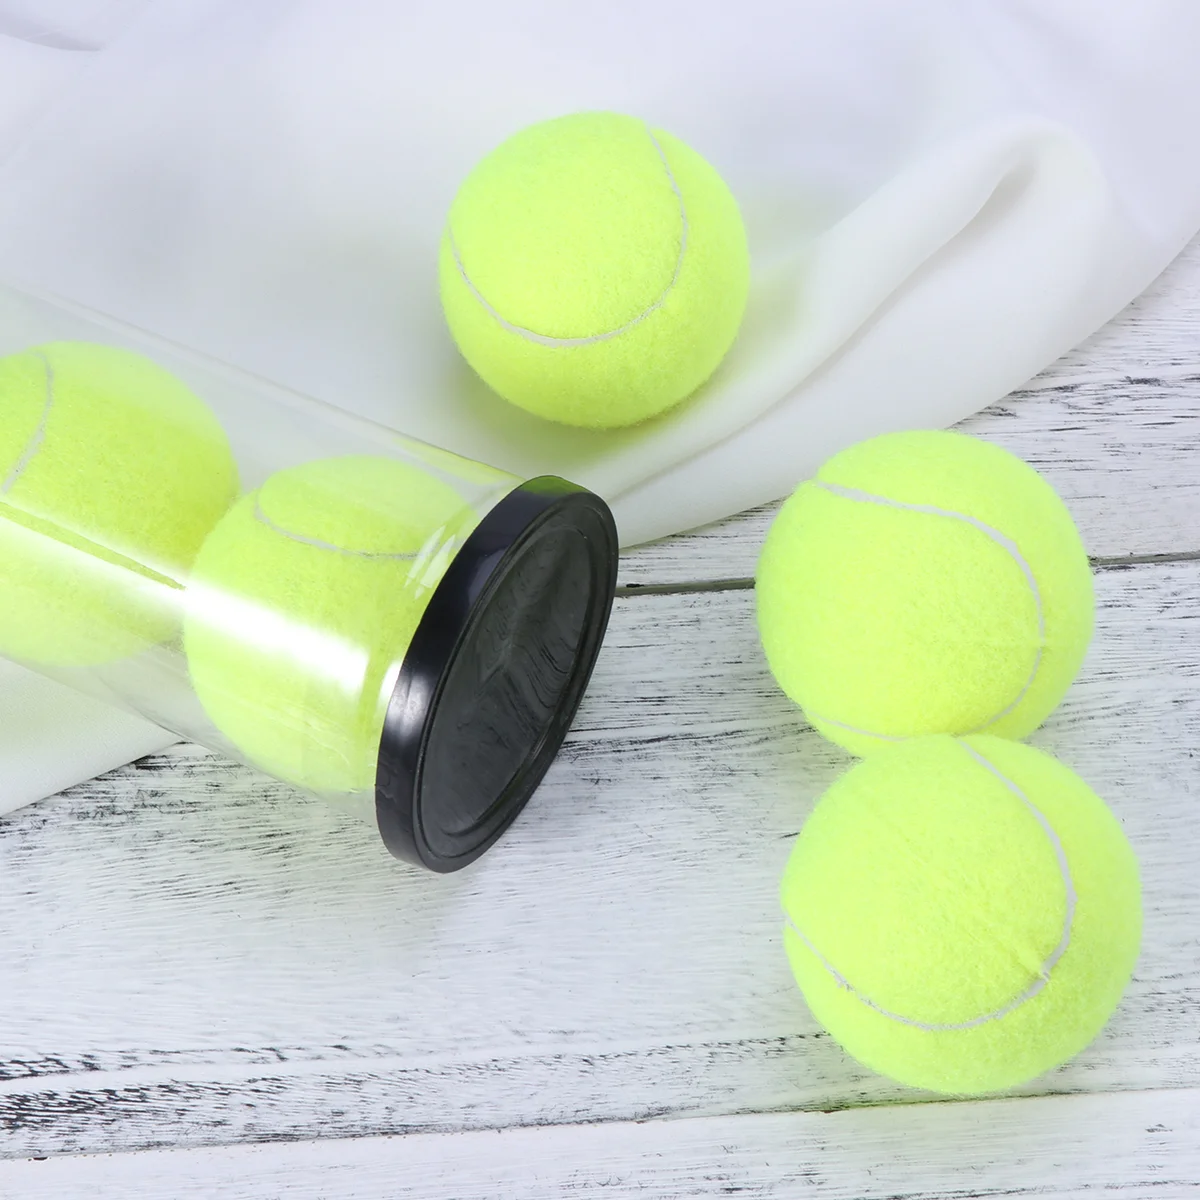 

6pcs Tennis Balls, Play Cricket, Sturdy& Durable, Highly Elasticity Great for Lessons, Practice, Throwing Machines& Playing